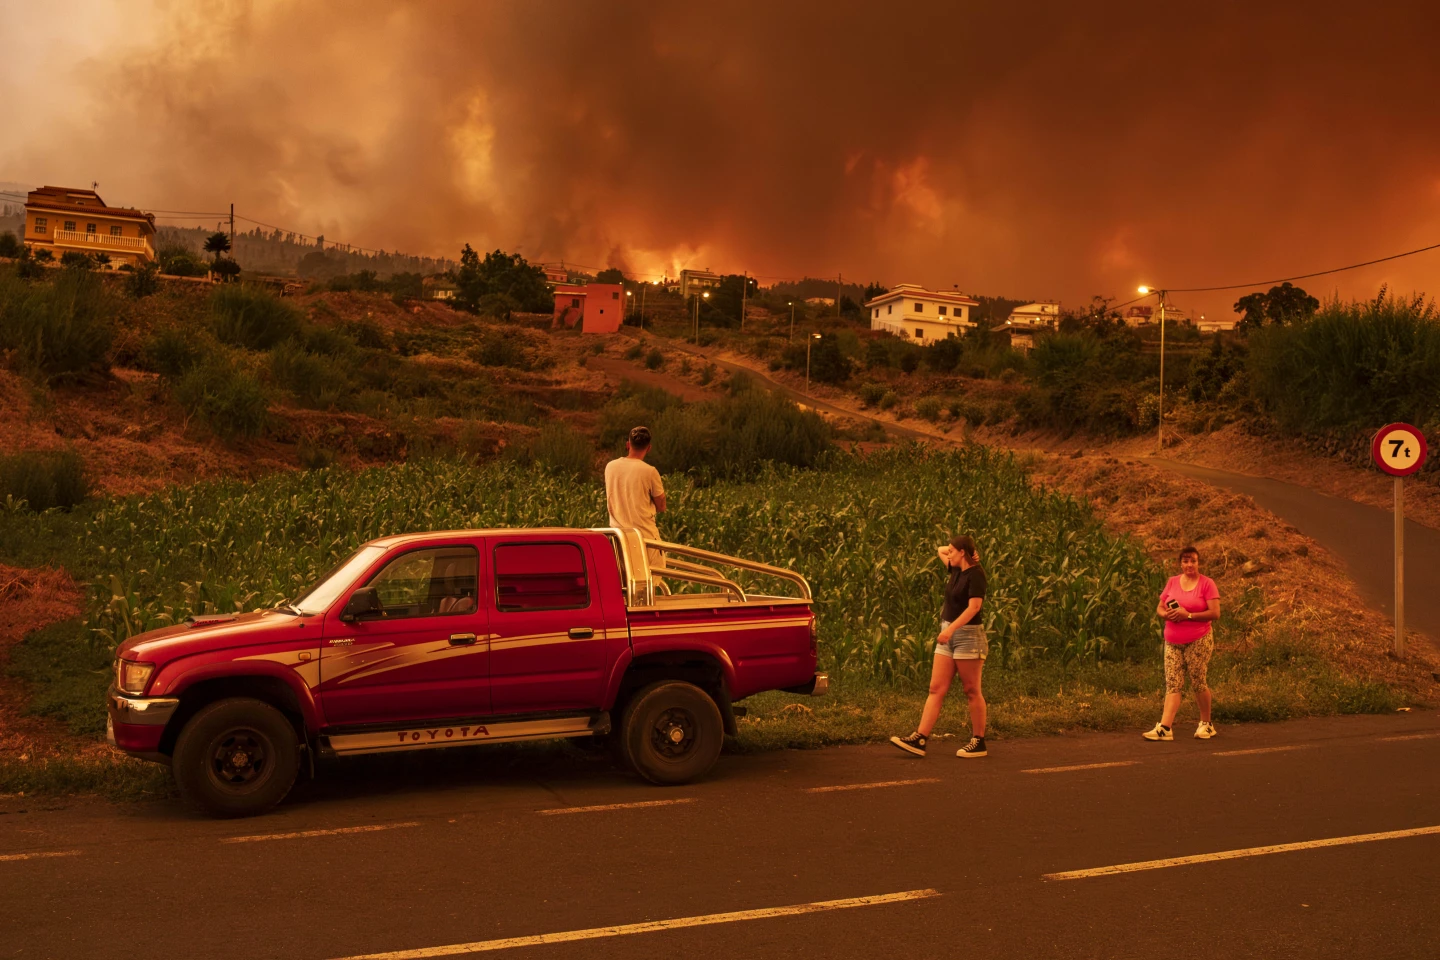 Canary Islands President Says 75,000 Hectare Wildfire Began Intentionally